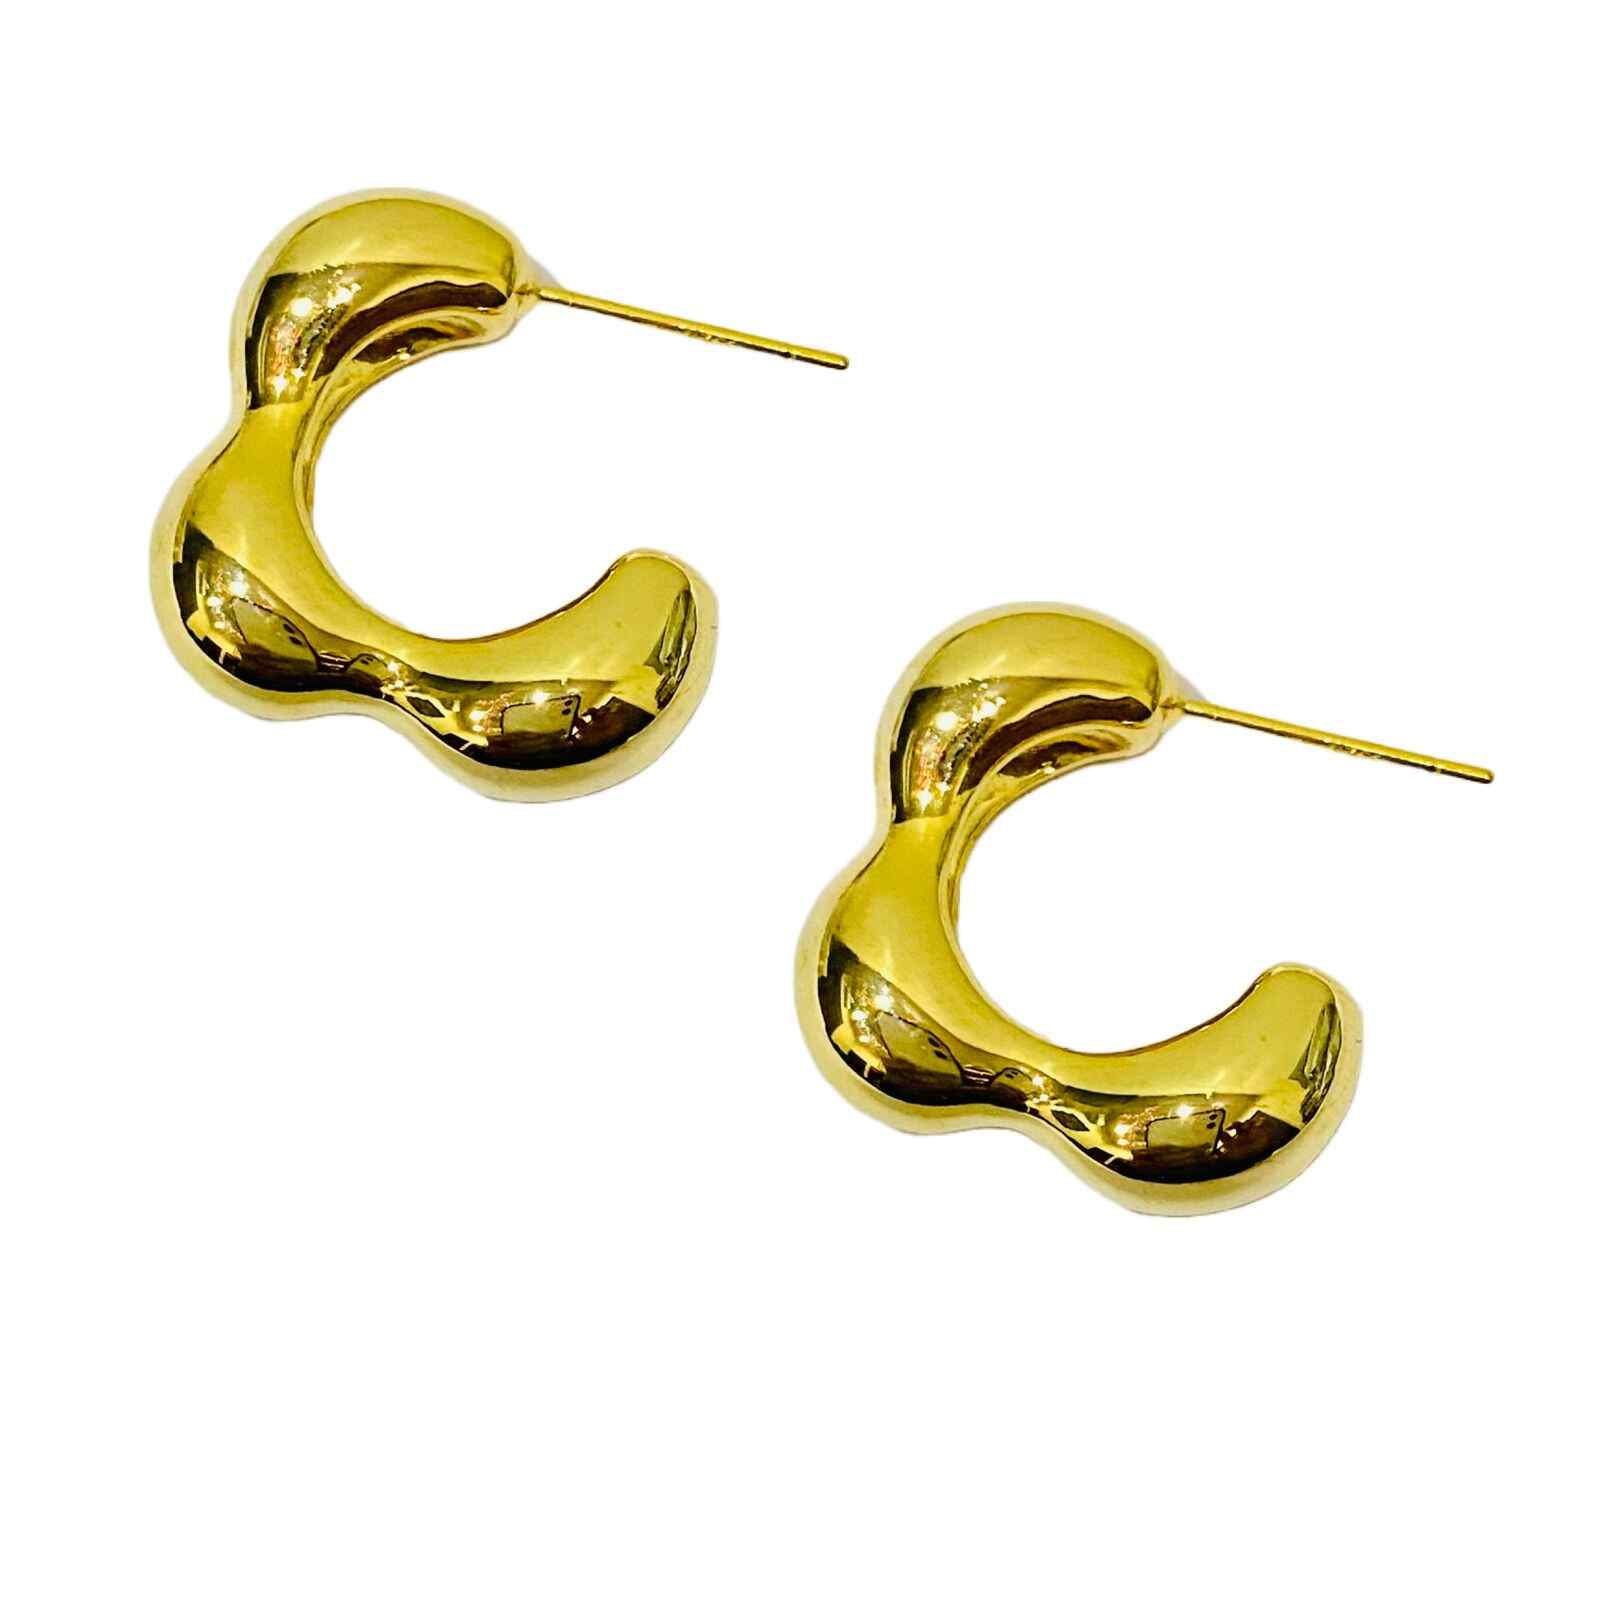 PANASH Black Goldplated Crescent Shaped Drop Earrings Buy PANASH Black  Goldplated Crescent Shaped Drop Earrings Online at Best Price in India   Nykaa